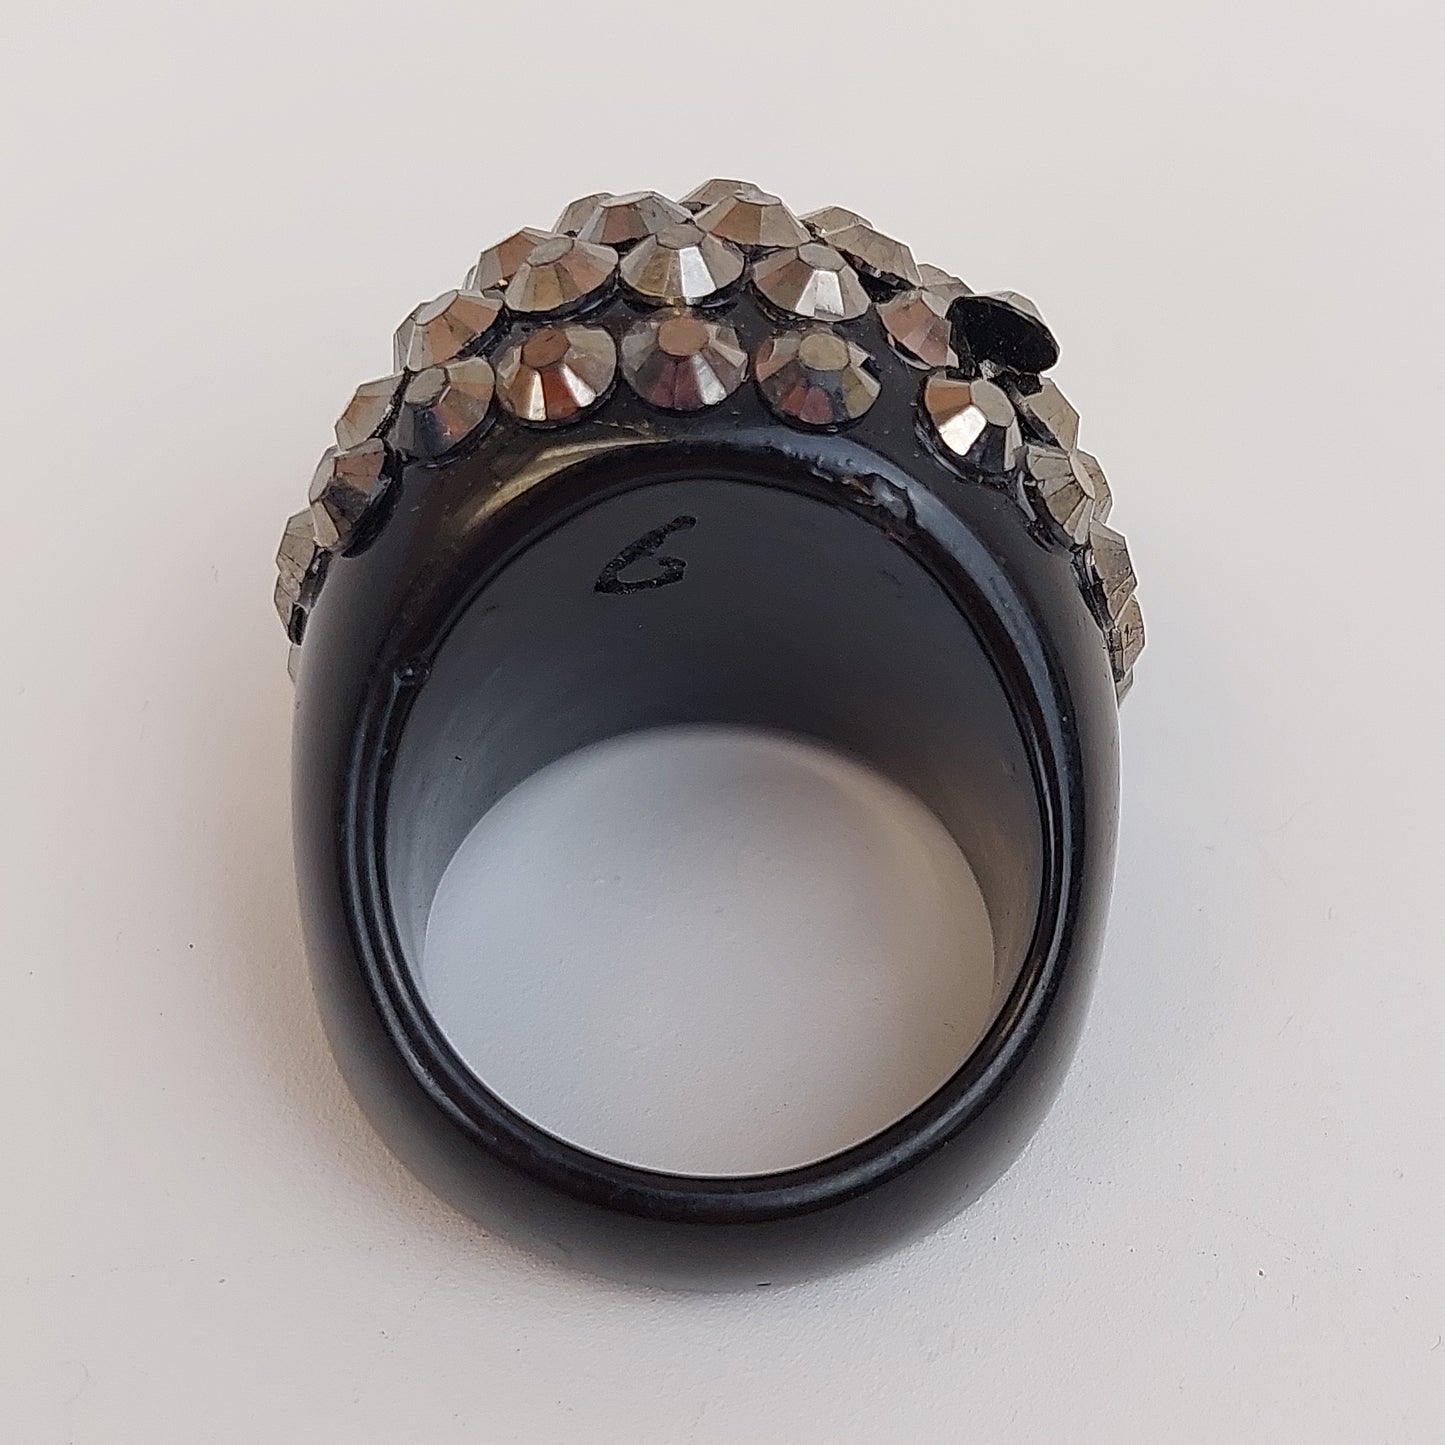 Black Lucite Resin Ring with Pewter Color Spikey Stones Bling Size 9